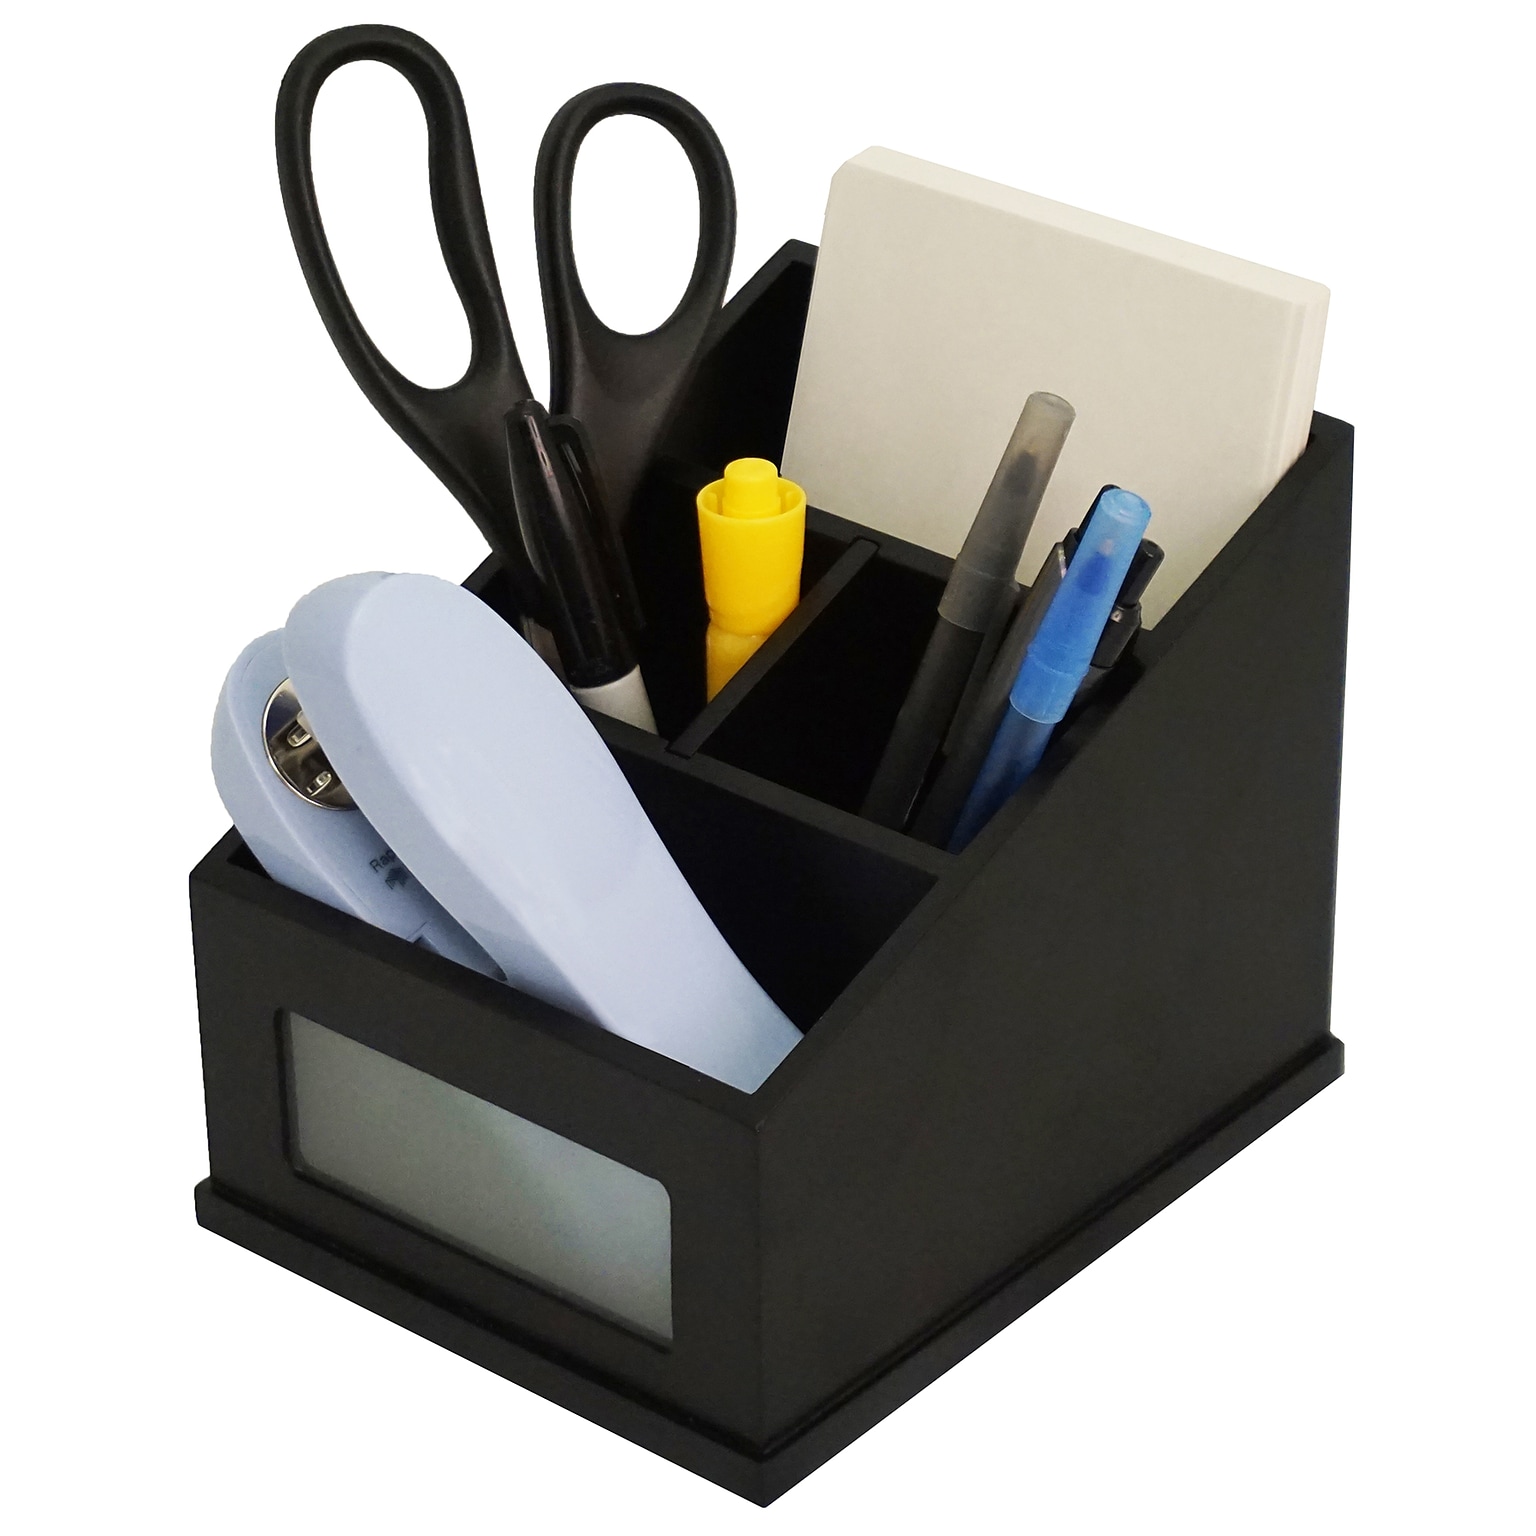 Victor Midnight Black Multi-Use Storage Caddy with Adjustable Compartment